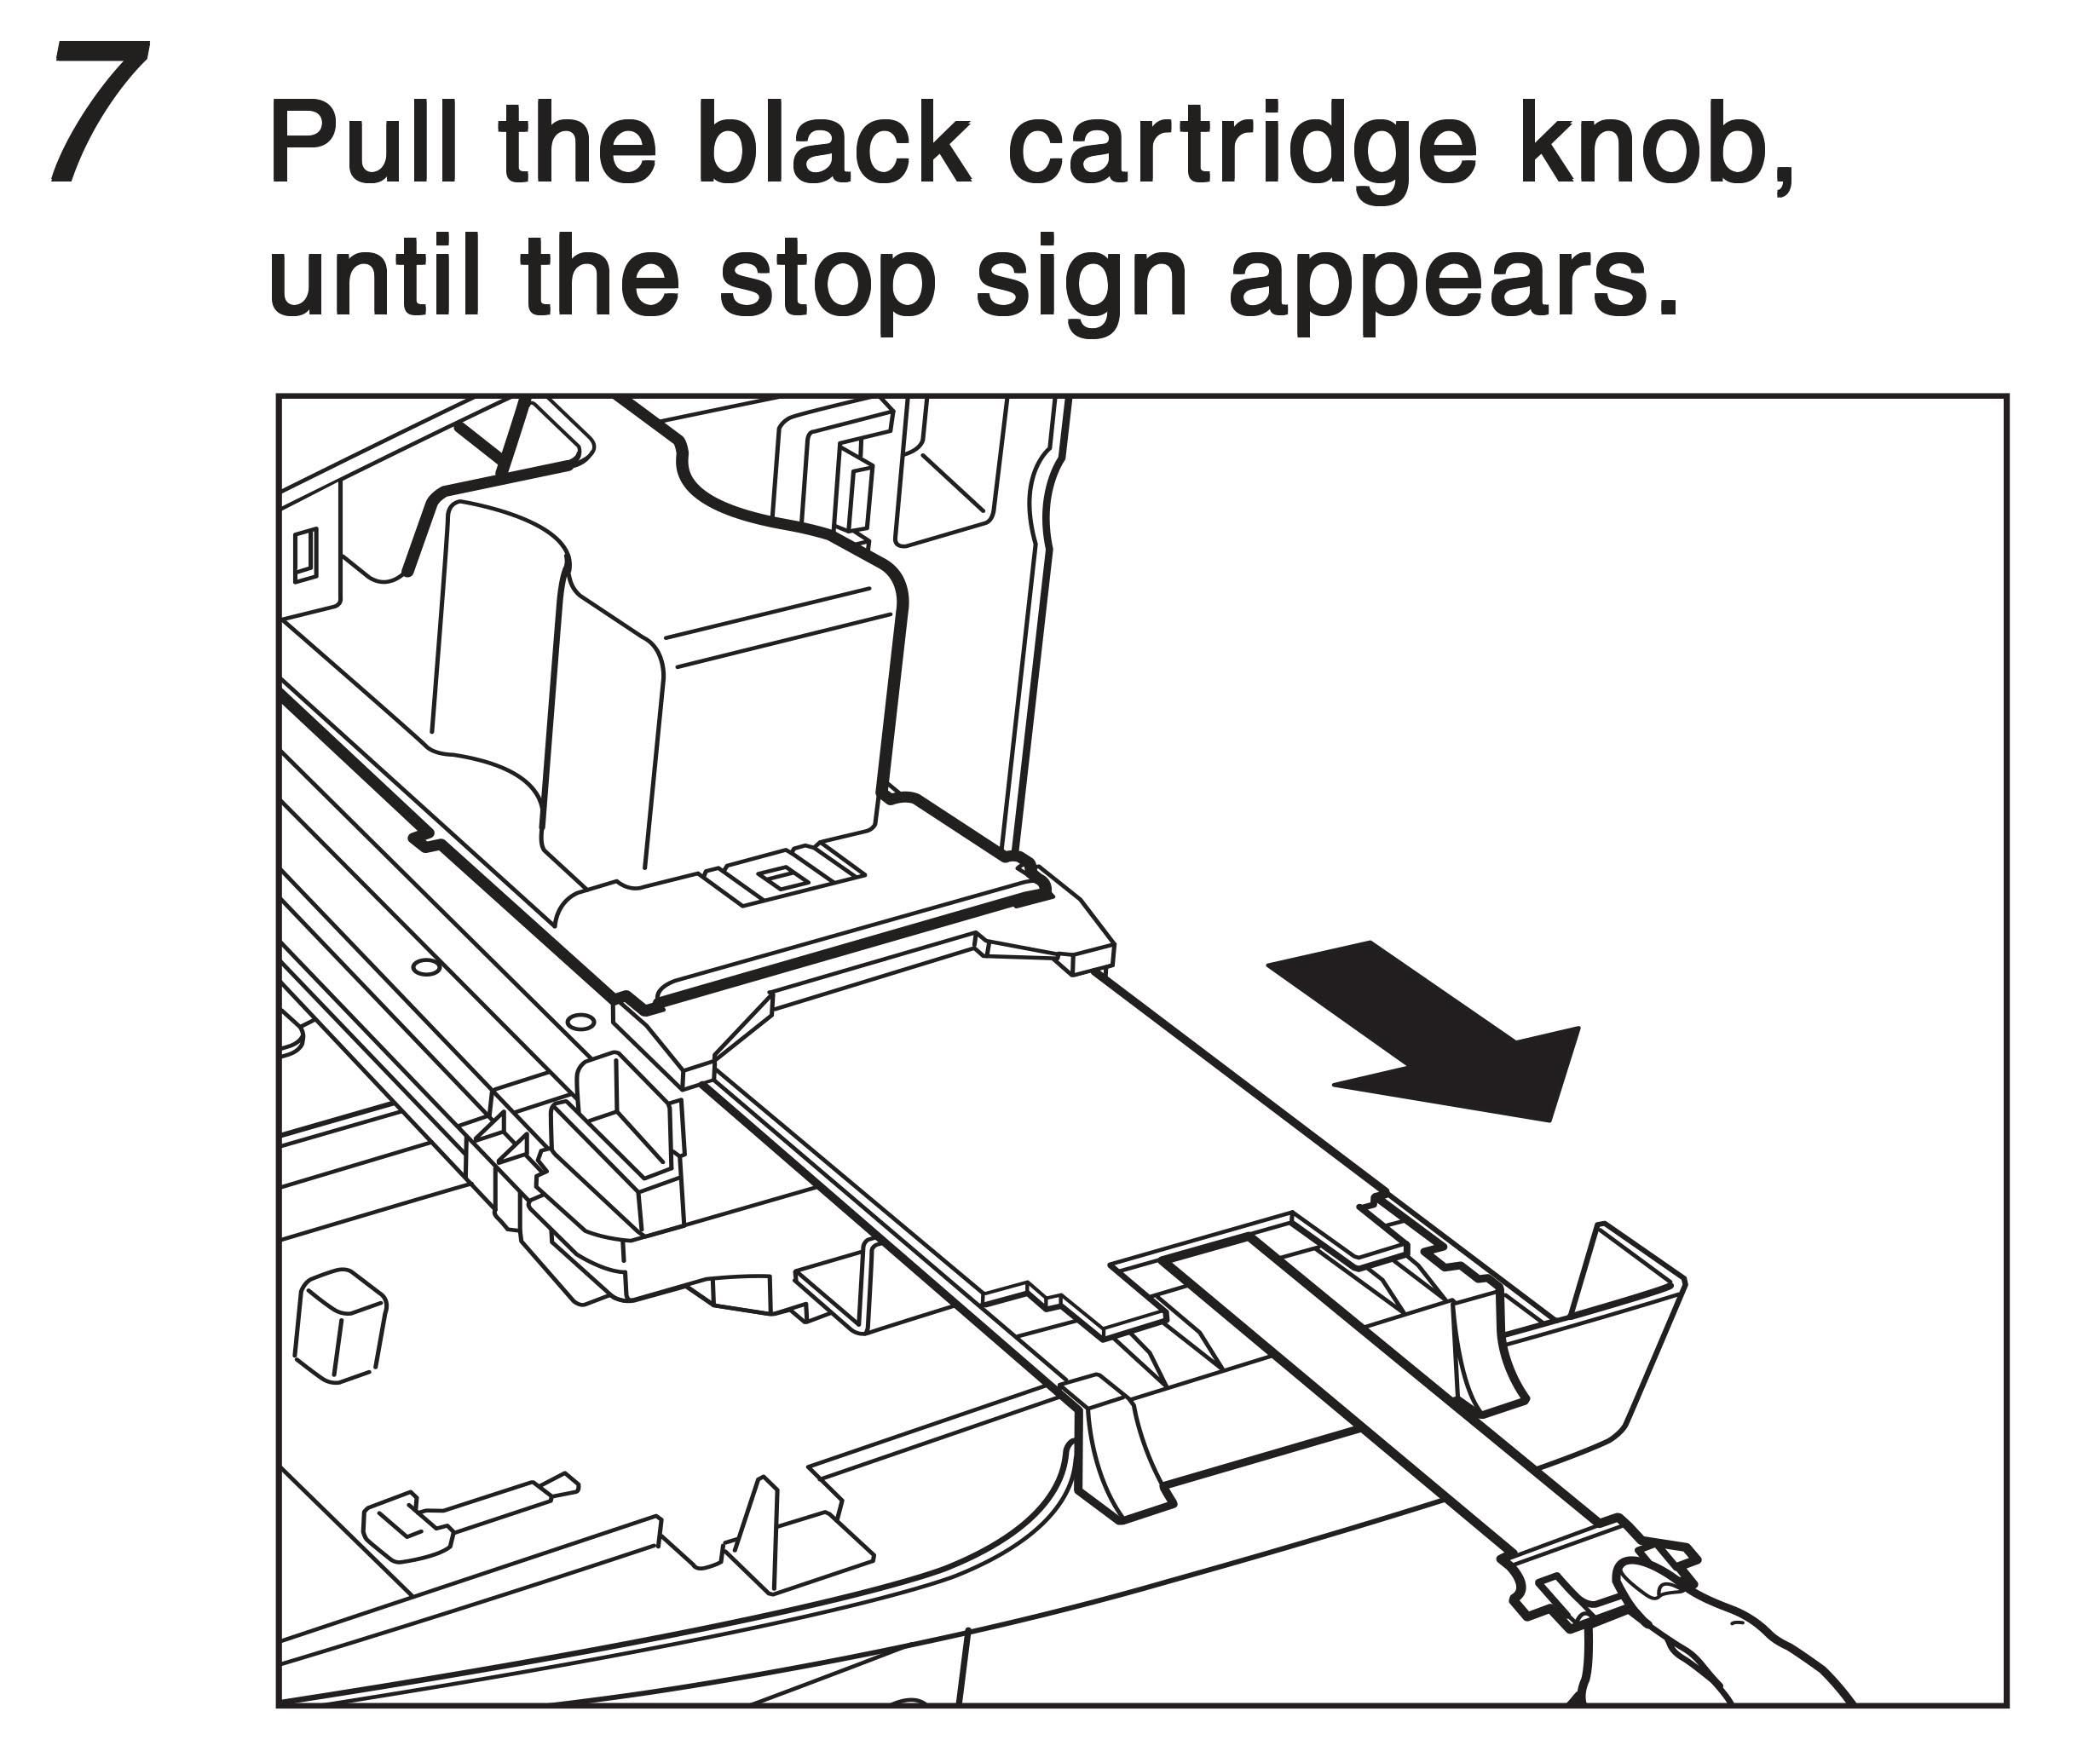 7. Pull the black cartridge know, until the stop sign appears.